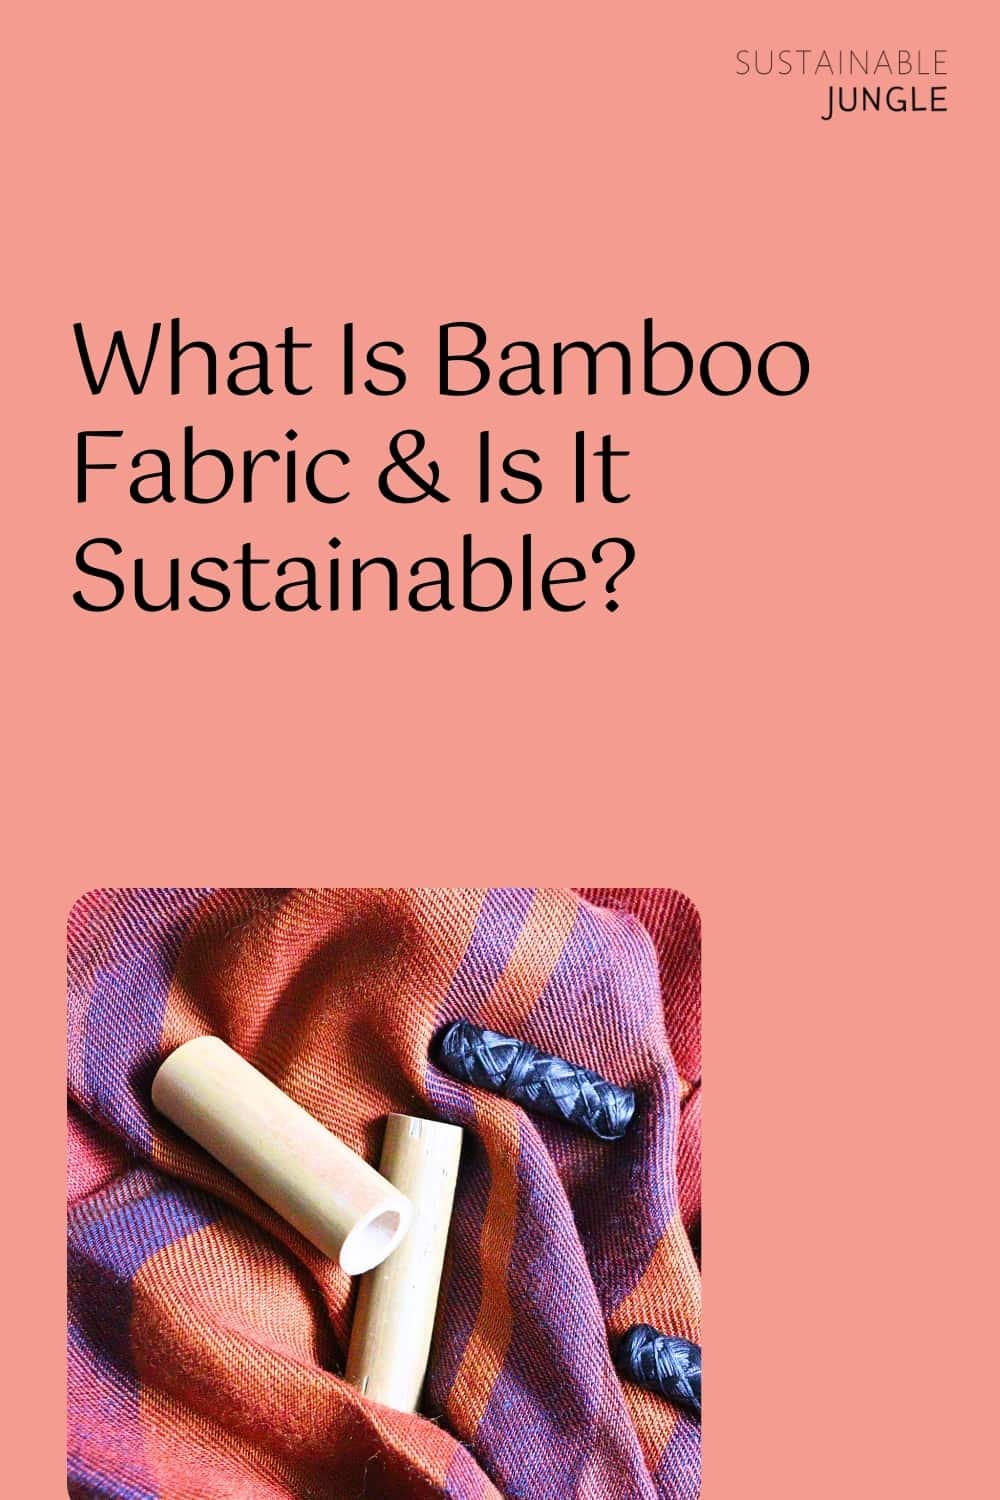 What is Bamboo Fabric & is It Sustainable? Image by Sustainable Jungle #whatisbamboofabric #isbambooviscosetoxic #bamboorayon #bamboolyocell #bamboosustainability #bamboofabric #sustainablejungle